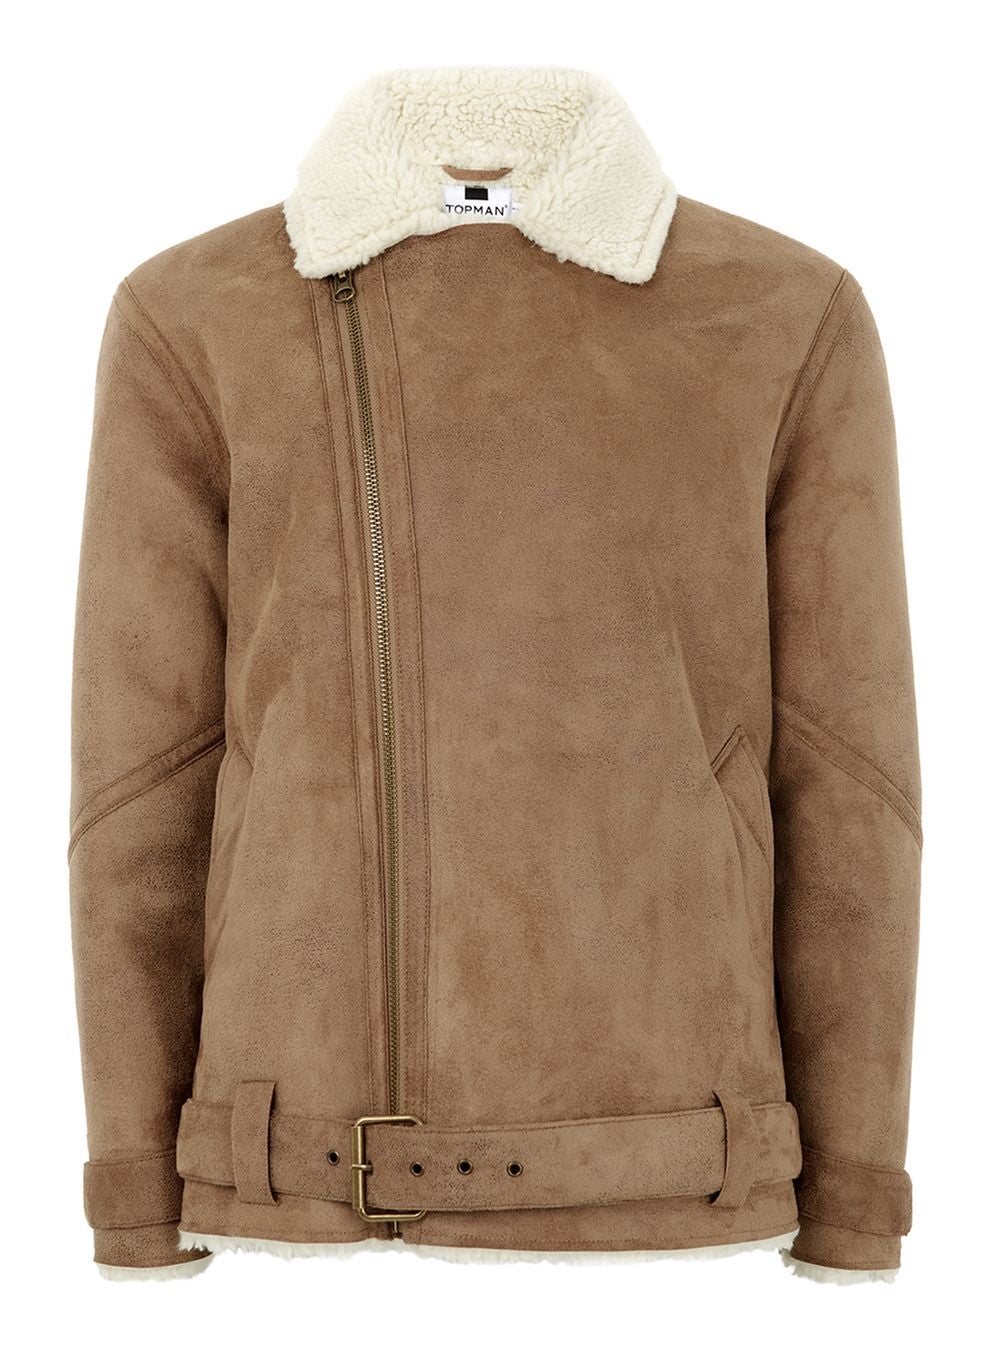 10 Cozy Shearling Coats For You And Bae To Slay In This Christmas
